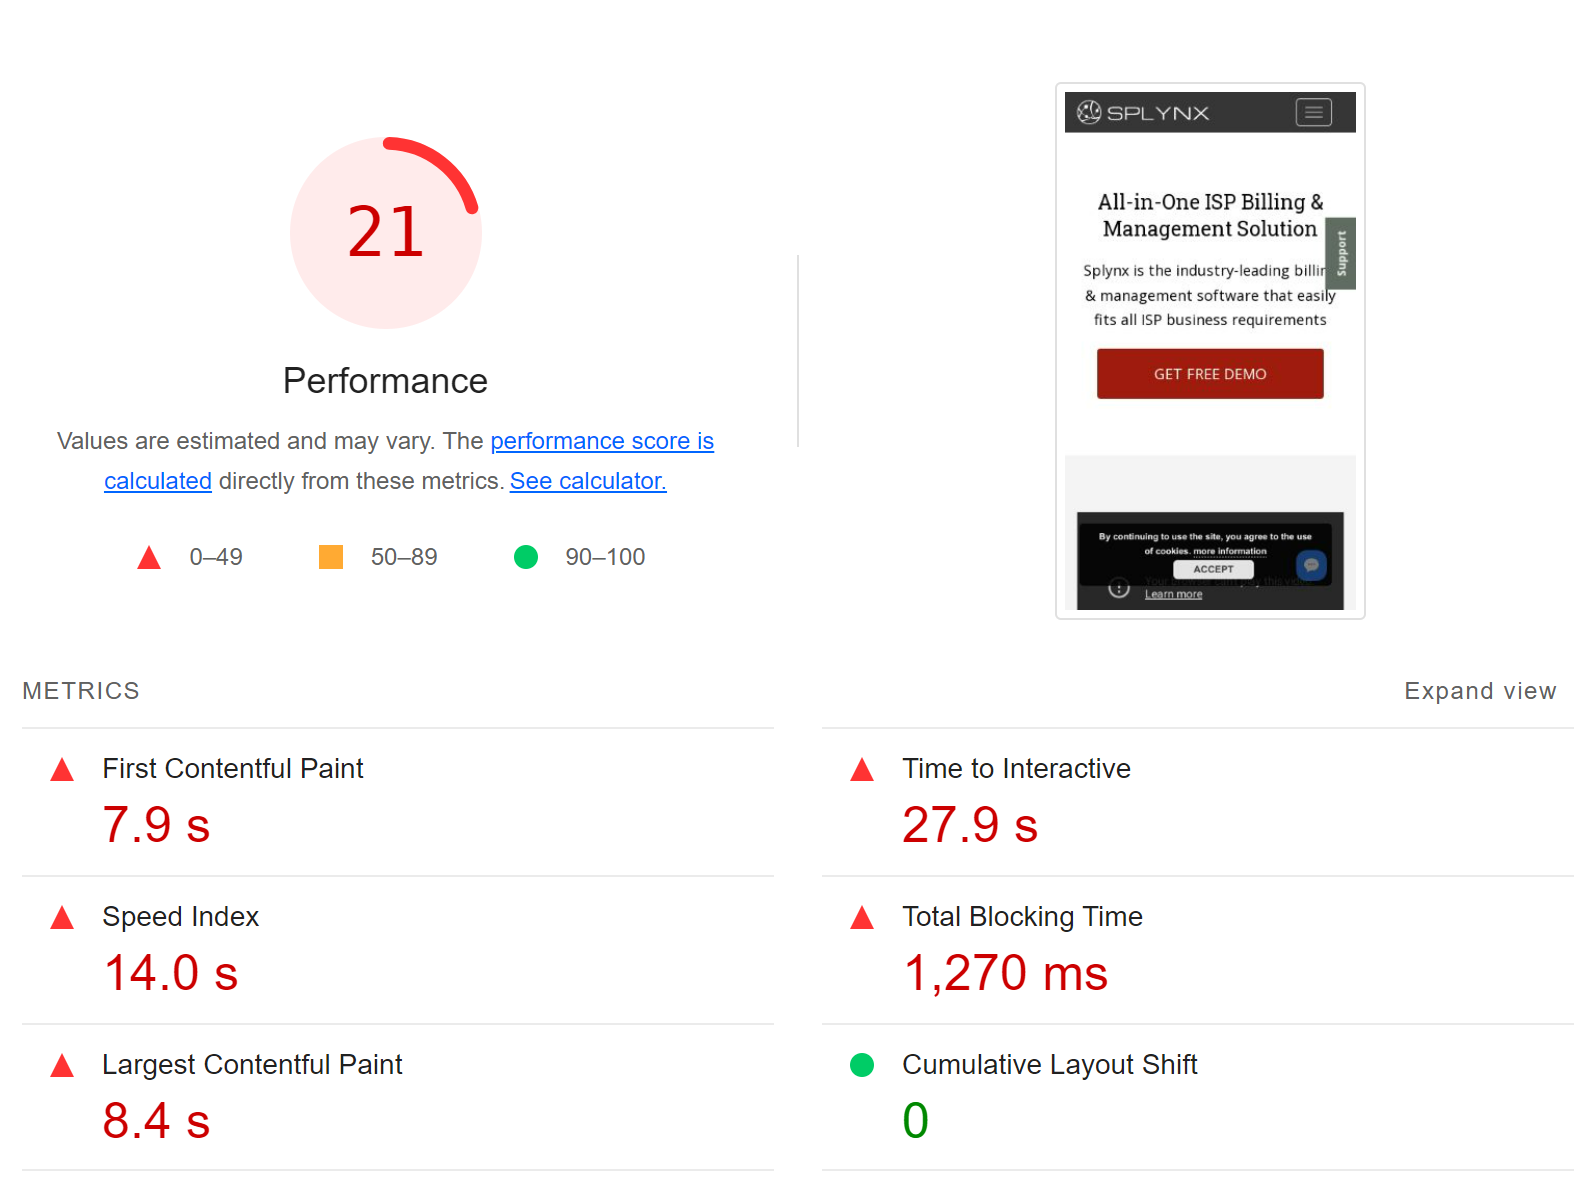 Solynx old website low performance according to Google LightHouse metrics